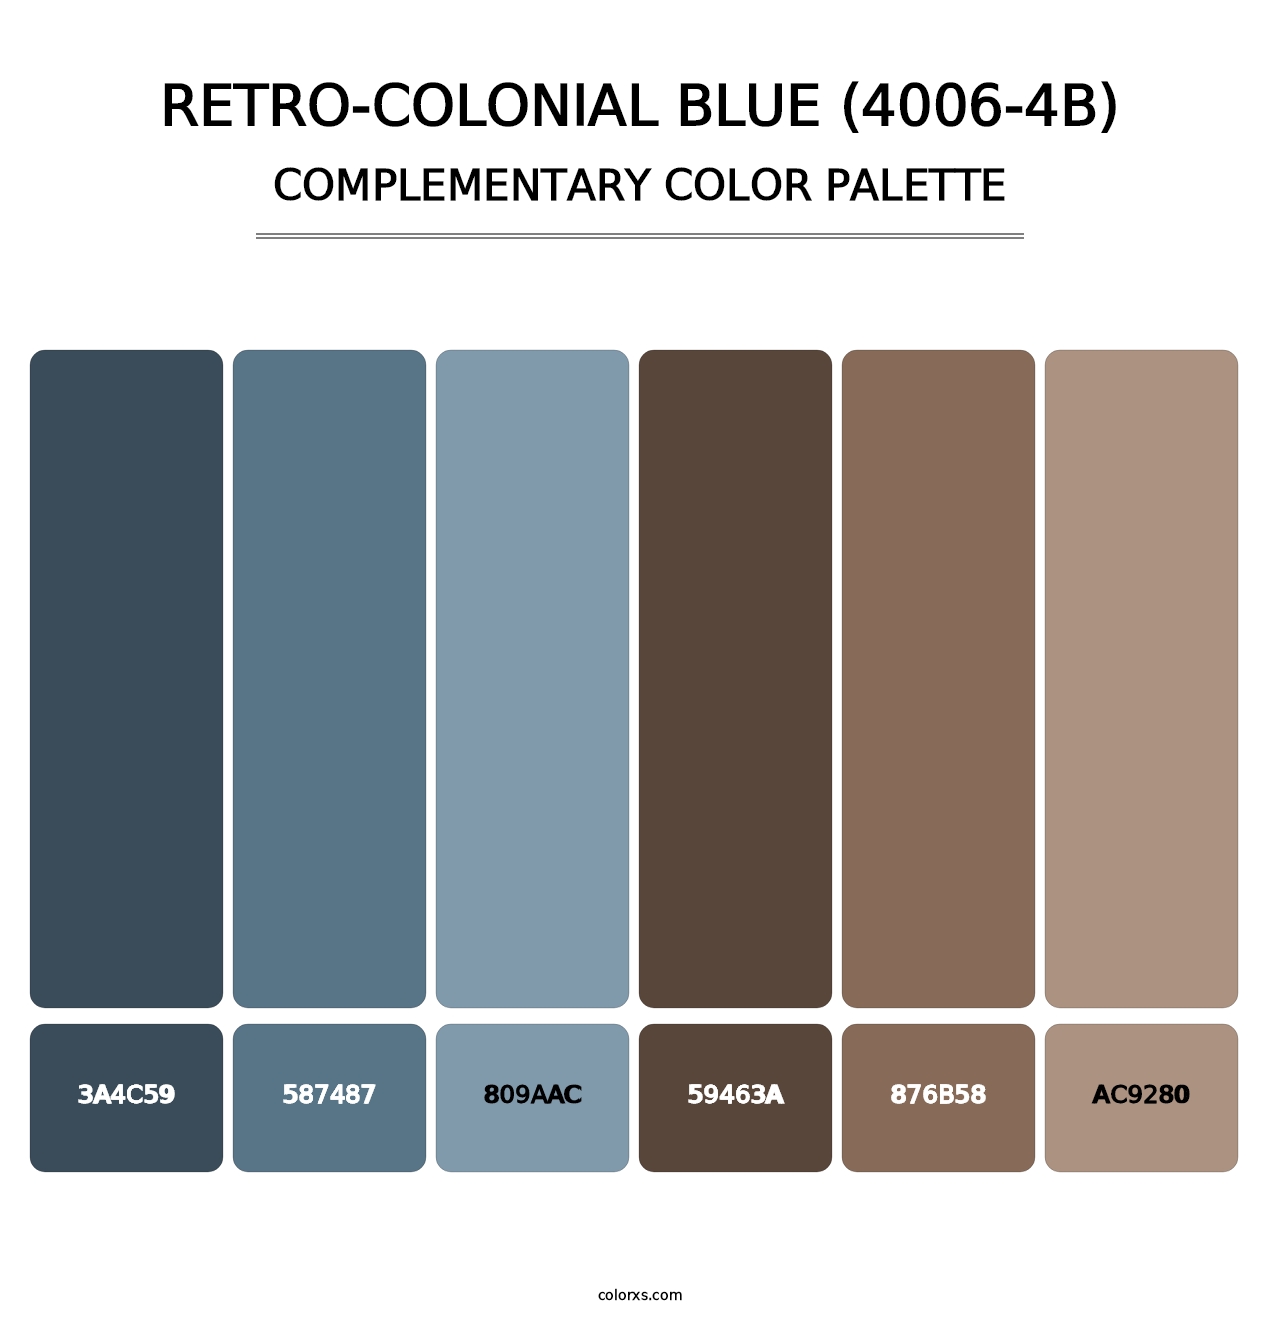 Retro-Colonial Blue (4006-4B) - Complementary Color Palette